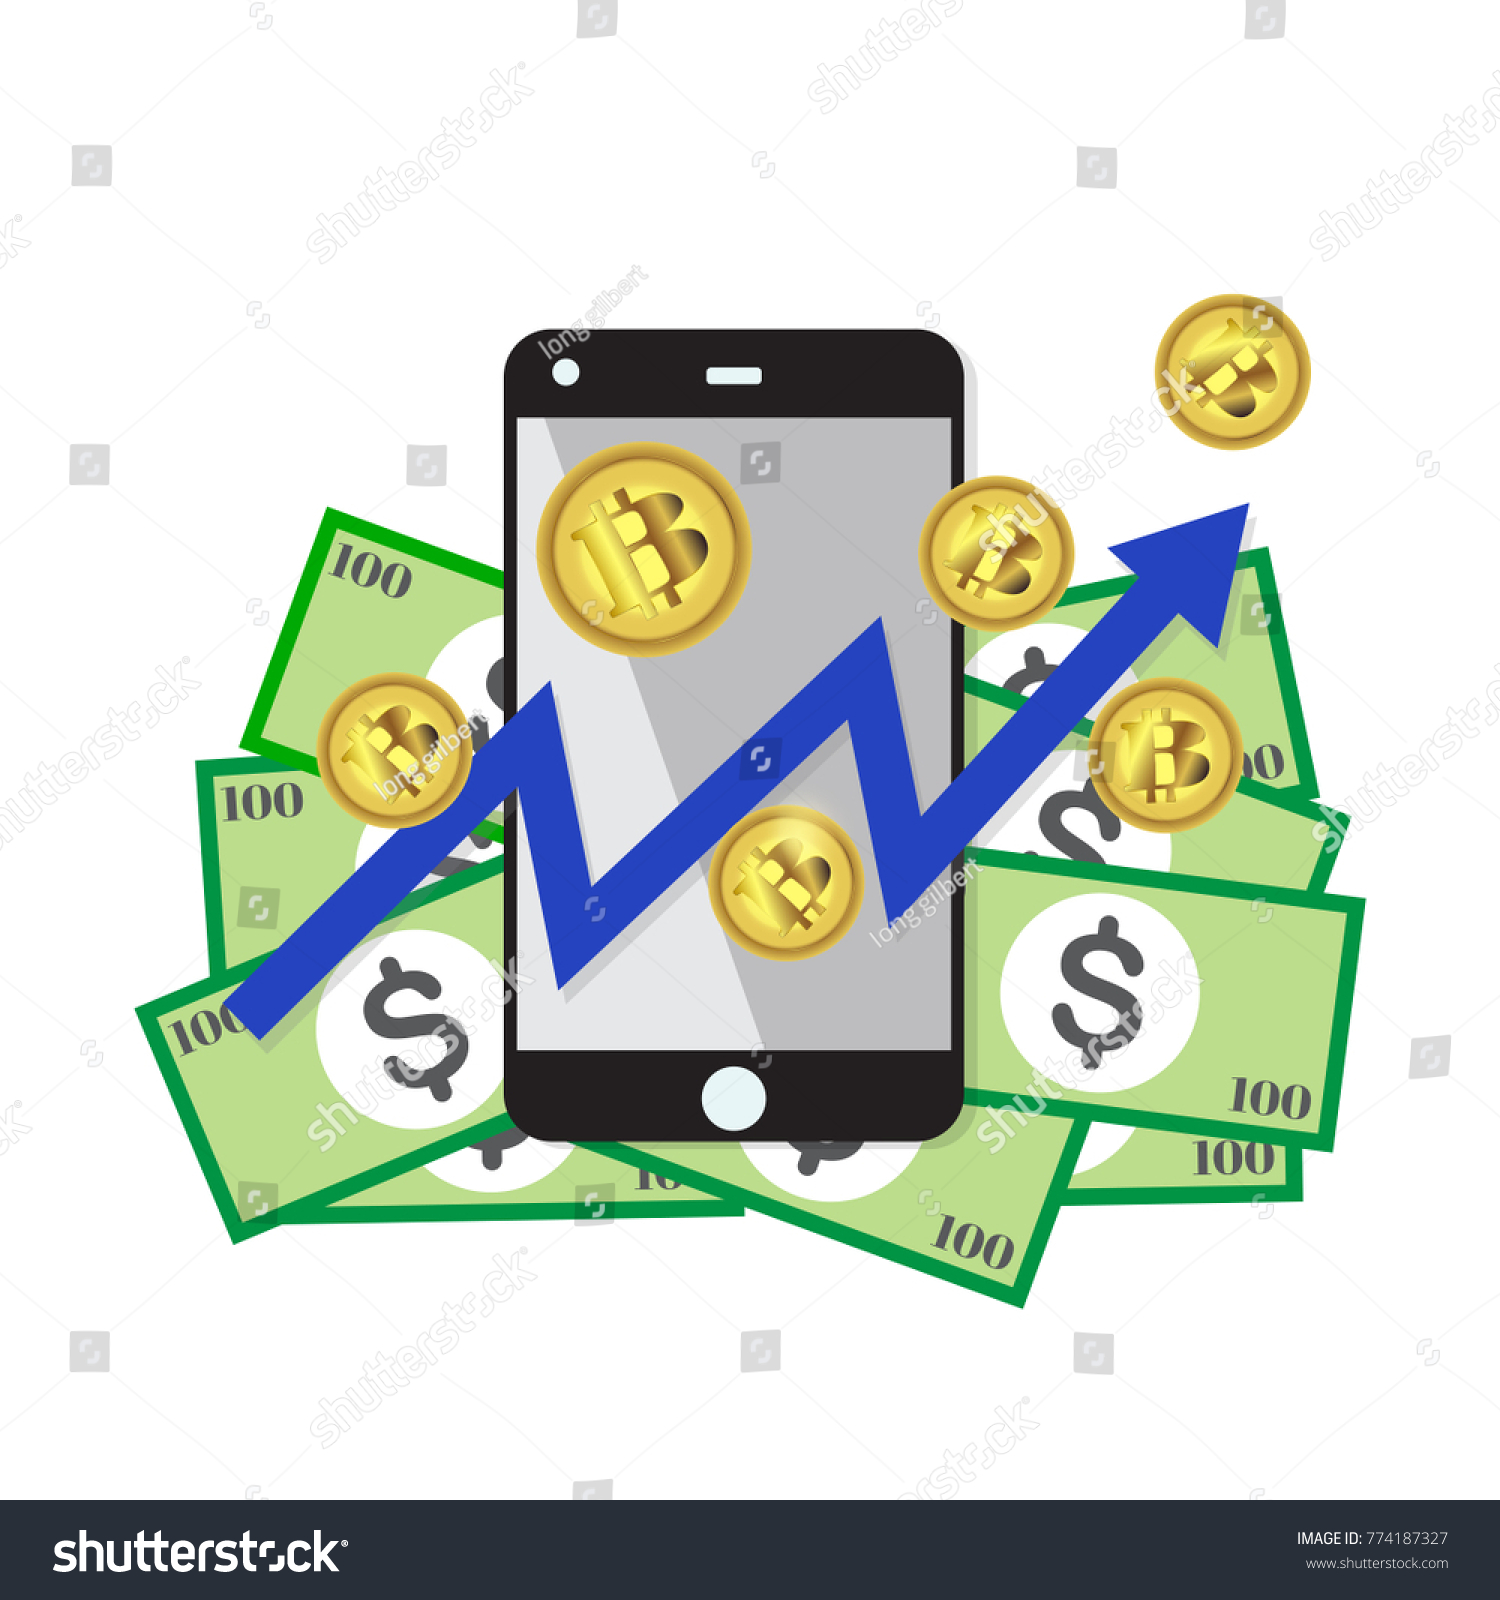 SVG of Bitcoin growth concept Payment and trade on smartphone symbol Bitcoin revenue illustration Stacks of gold coins like income graph with bitcoinVector illustration isolated on background svg